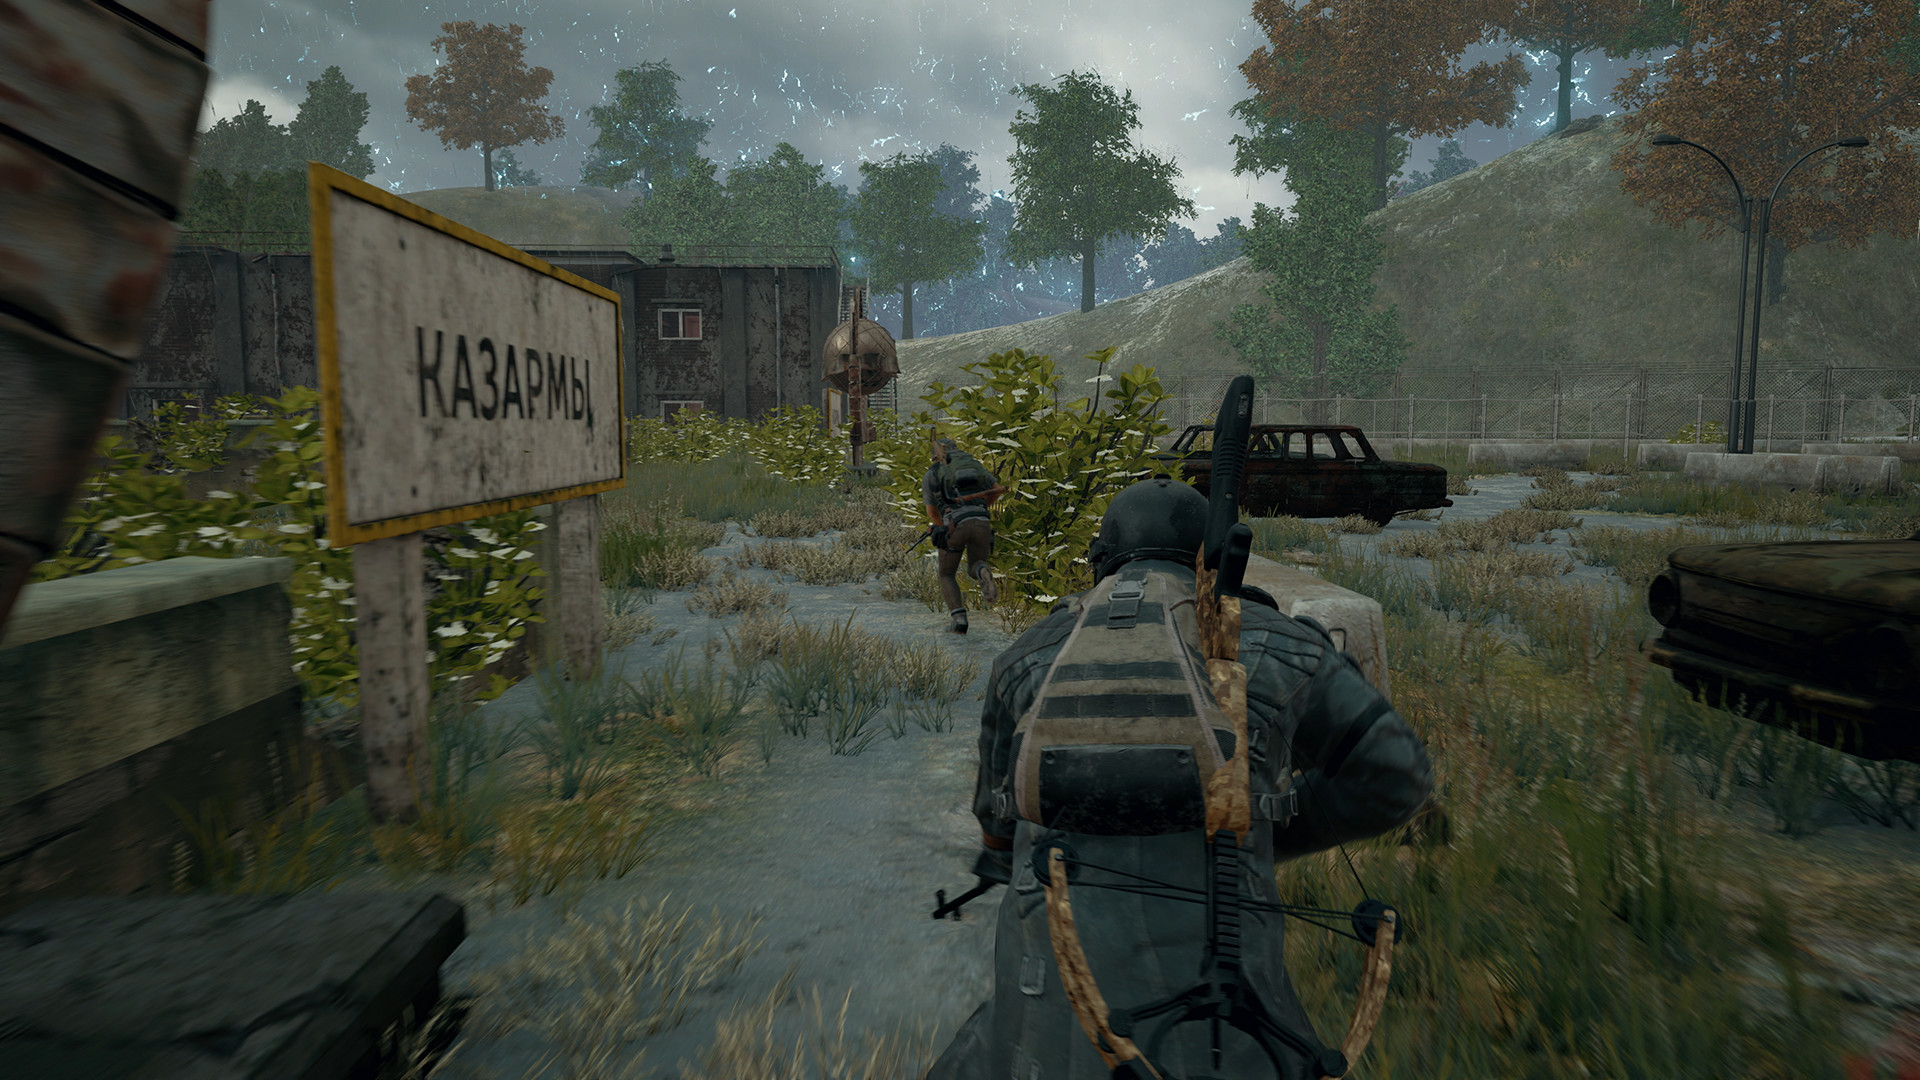 PUBG Dev Addresses Cheating; Additional Security Measurements Implemented to Detect New Cheating 